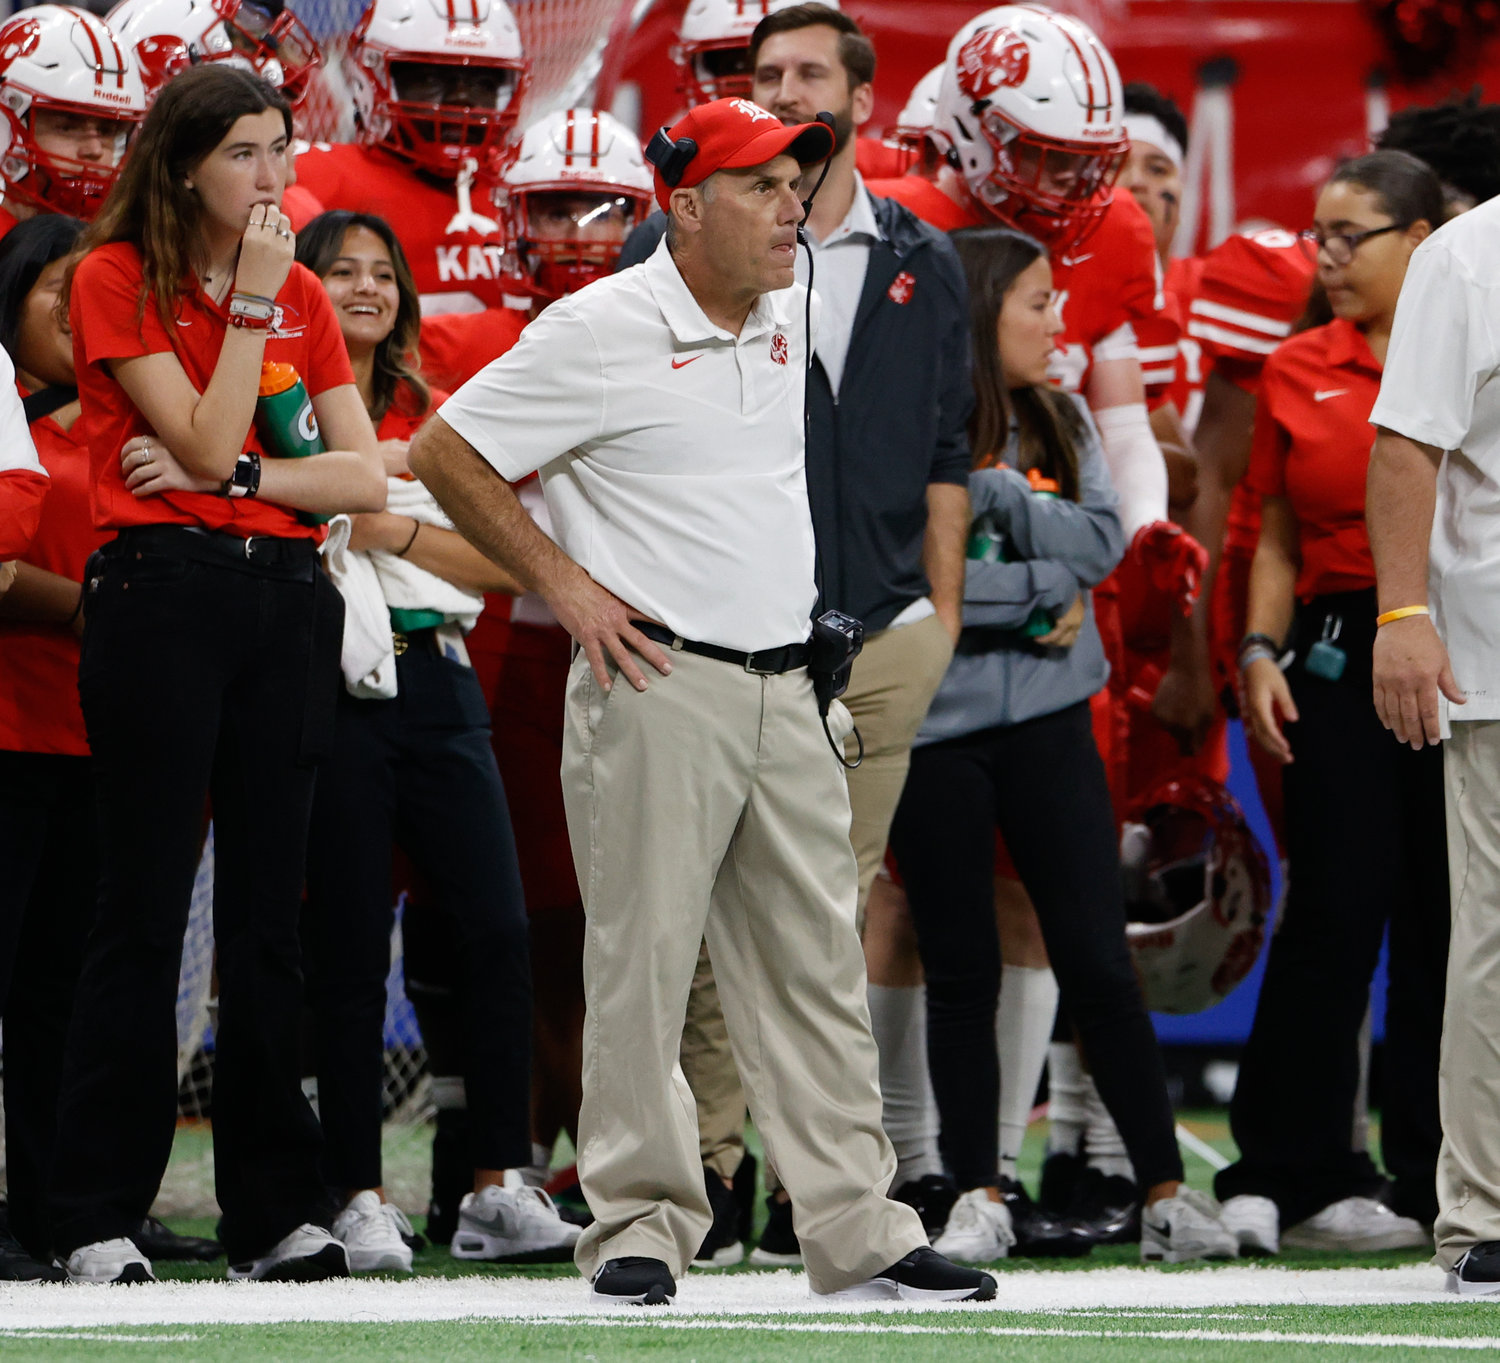 Katy head coach Gary Joseph during the Class 6A-DII state semifinal football game between Katy and Vandegrift on Dec. 10, 2022 in San Antonio.